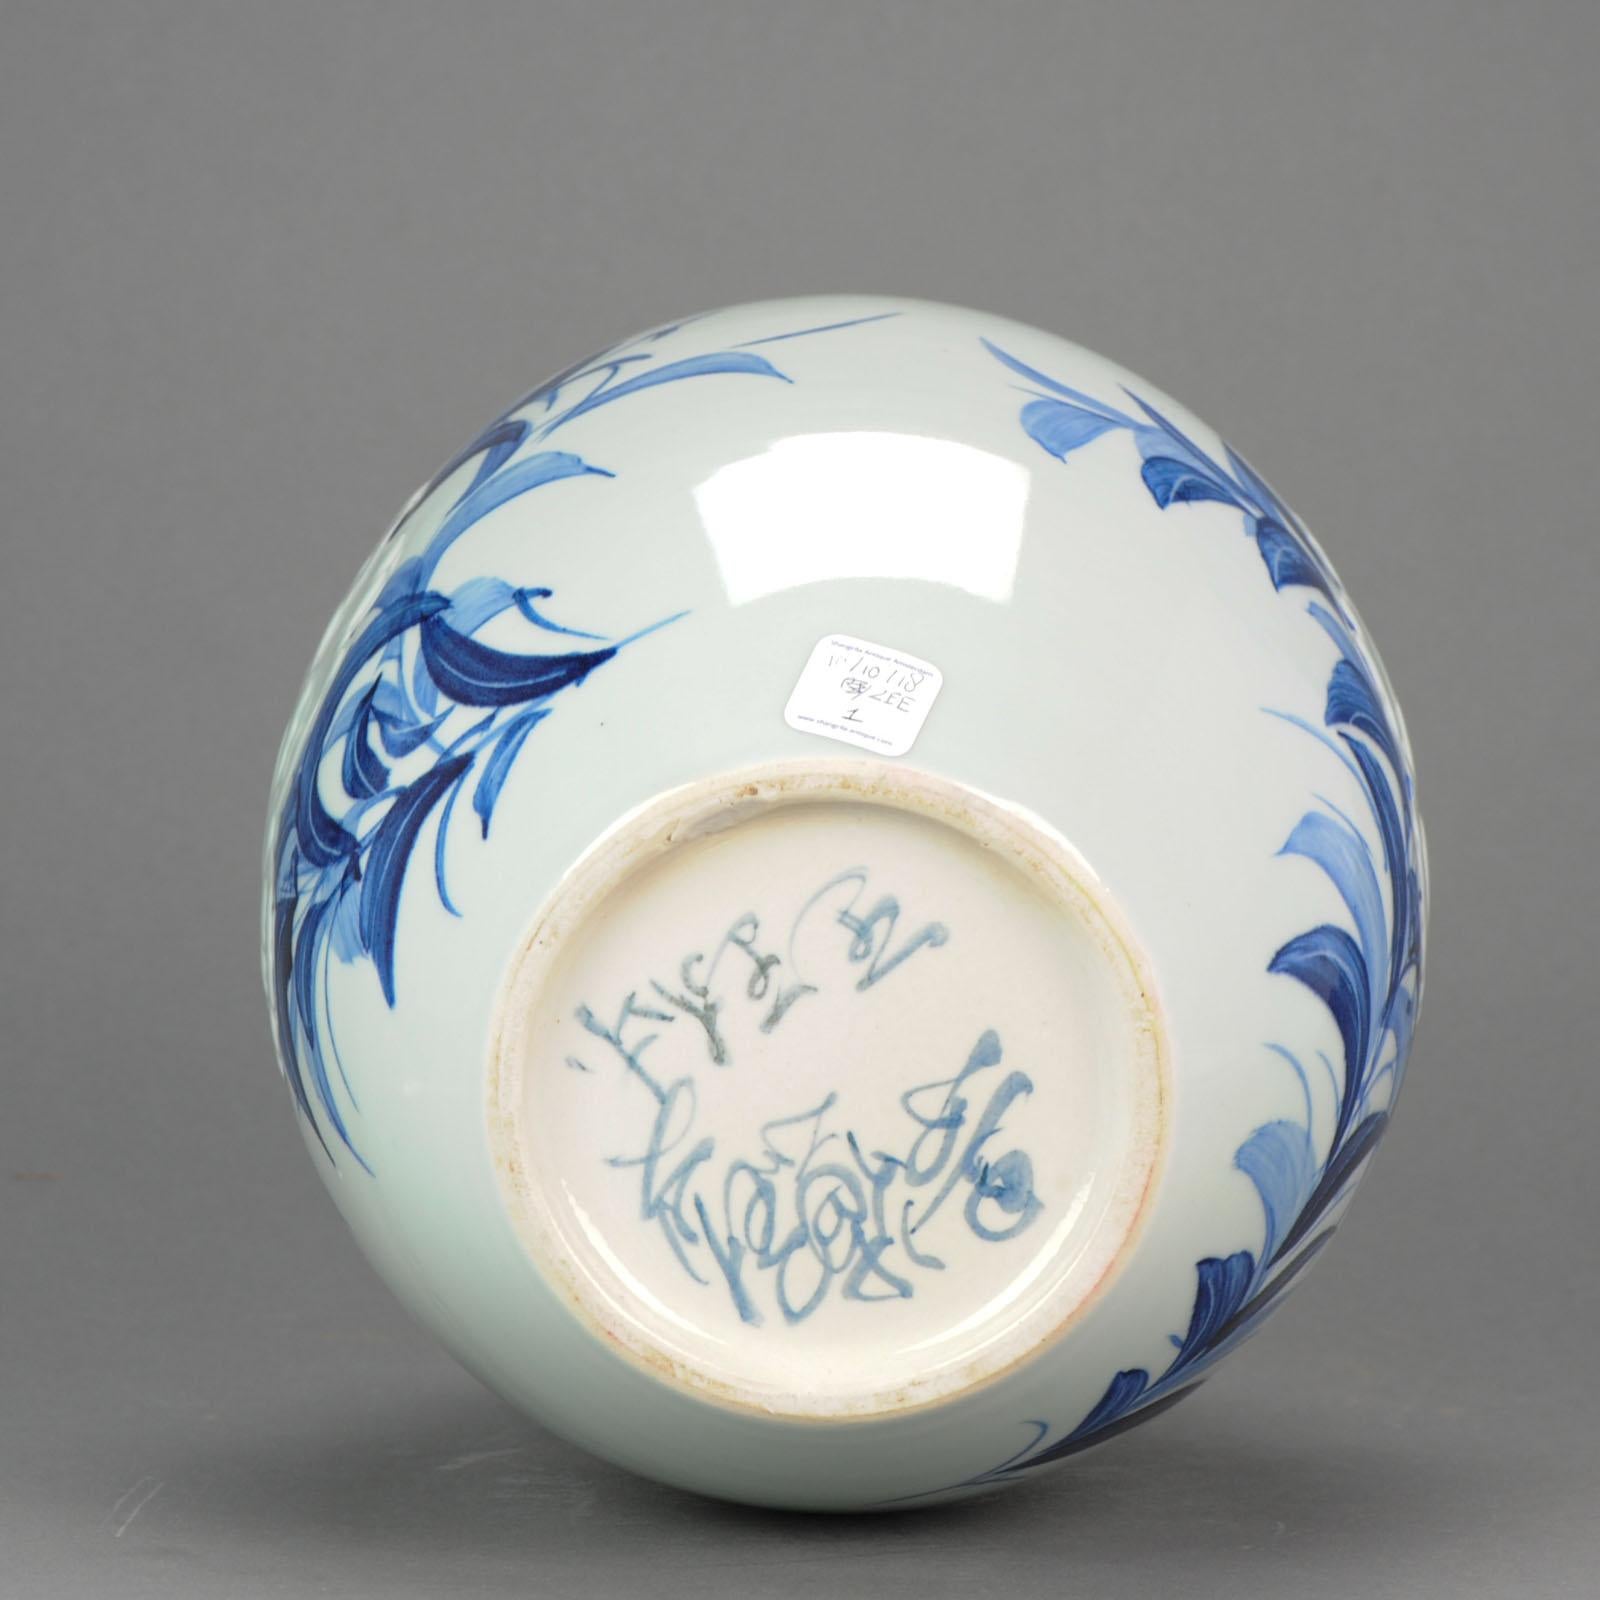 Wanglin '1972' Artist Mark Celadon Anhua Vase Dated 2001 Chinese Porcelain Vase For Sale 5